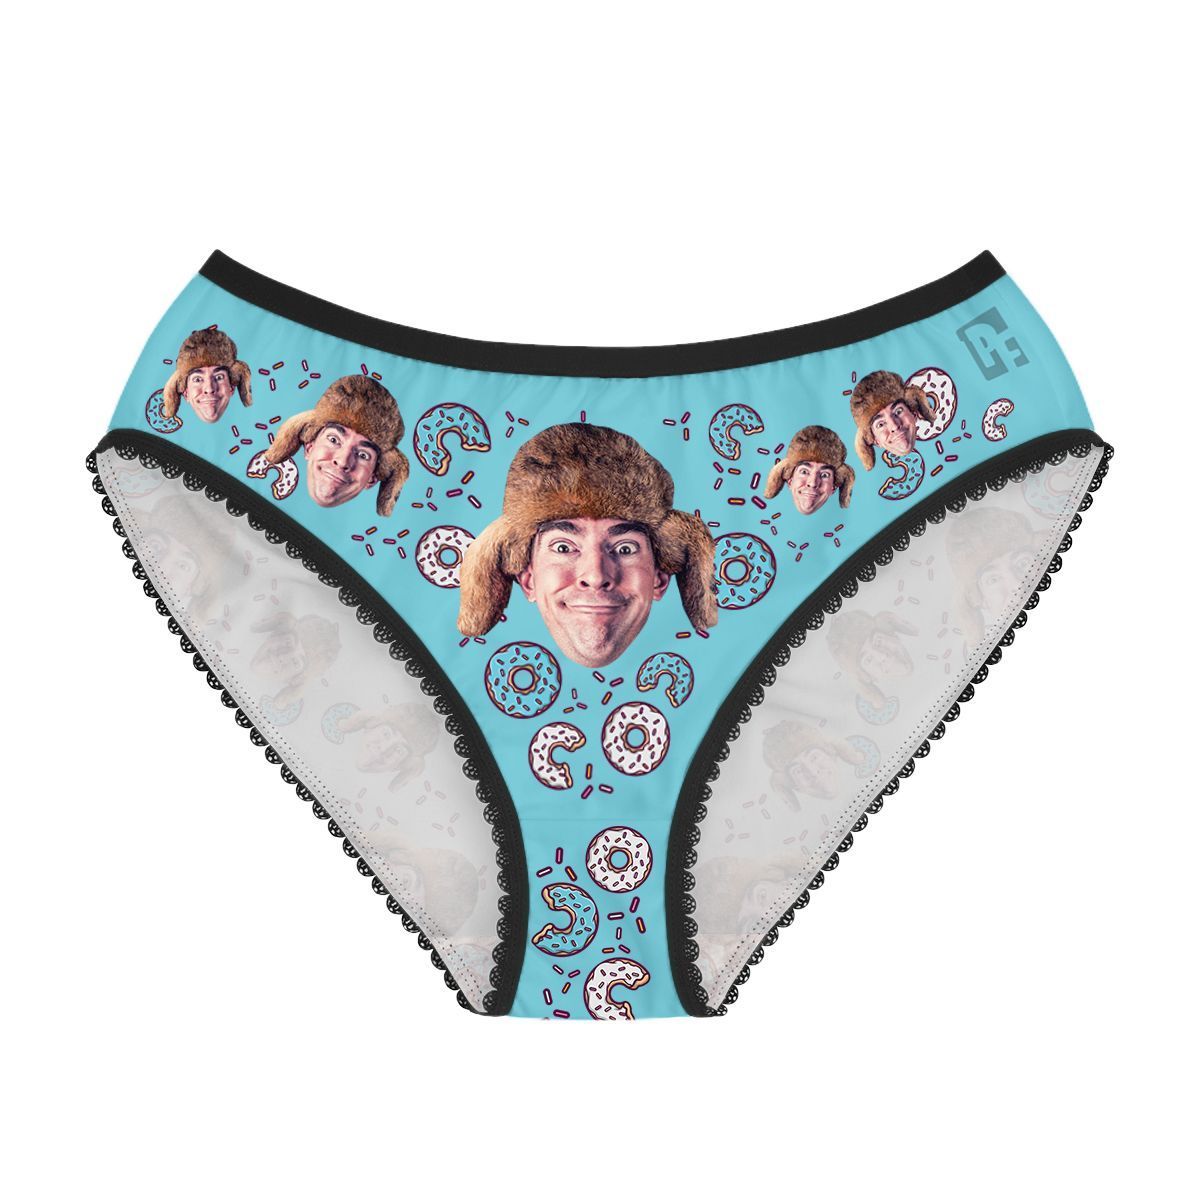 Blue Donuts women's underwear briefs personalized with photo printed on them